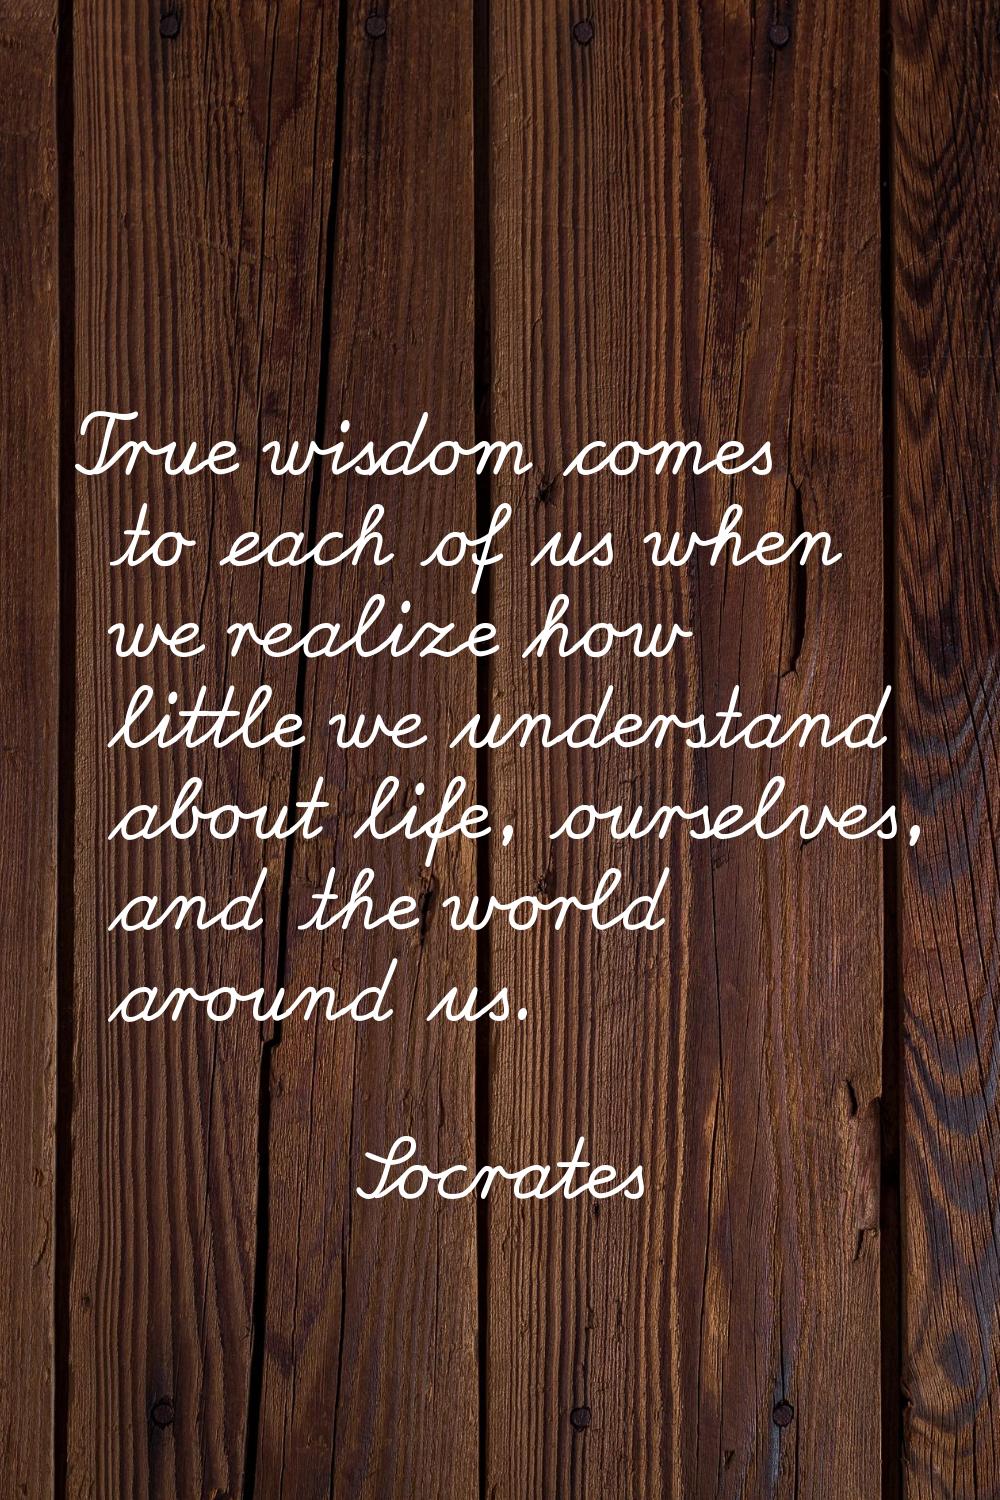 True wisdom comes to each of us when we realize how little we understand about life, ourselves, and